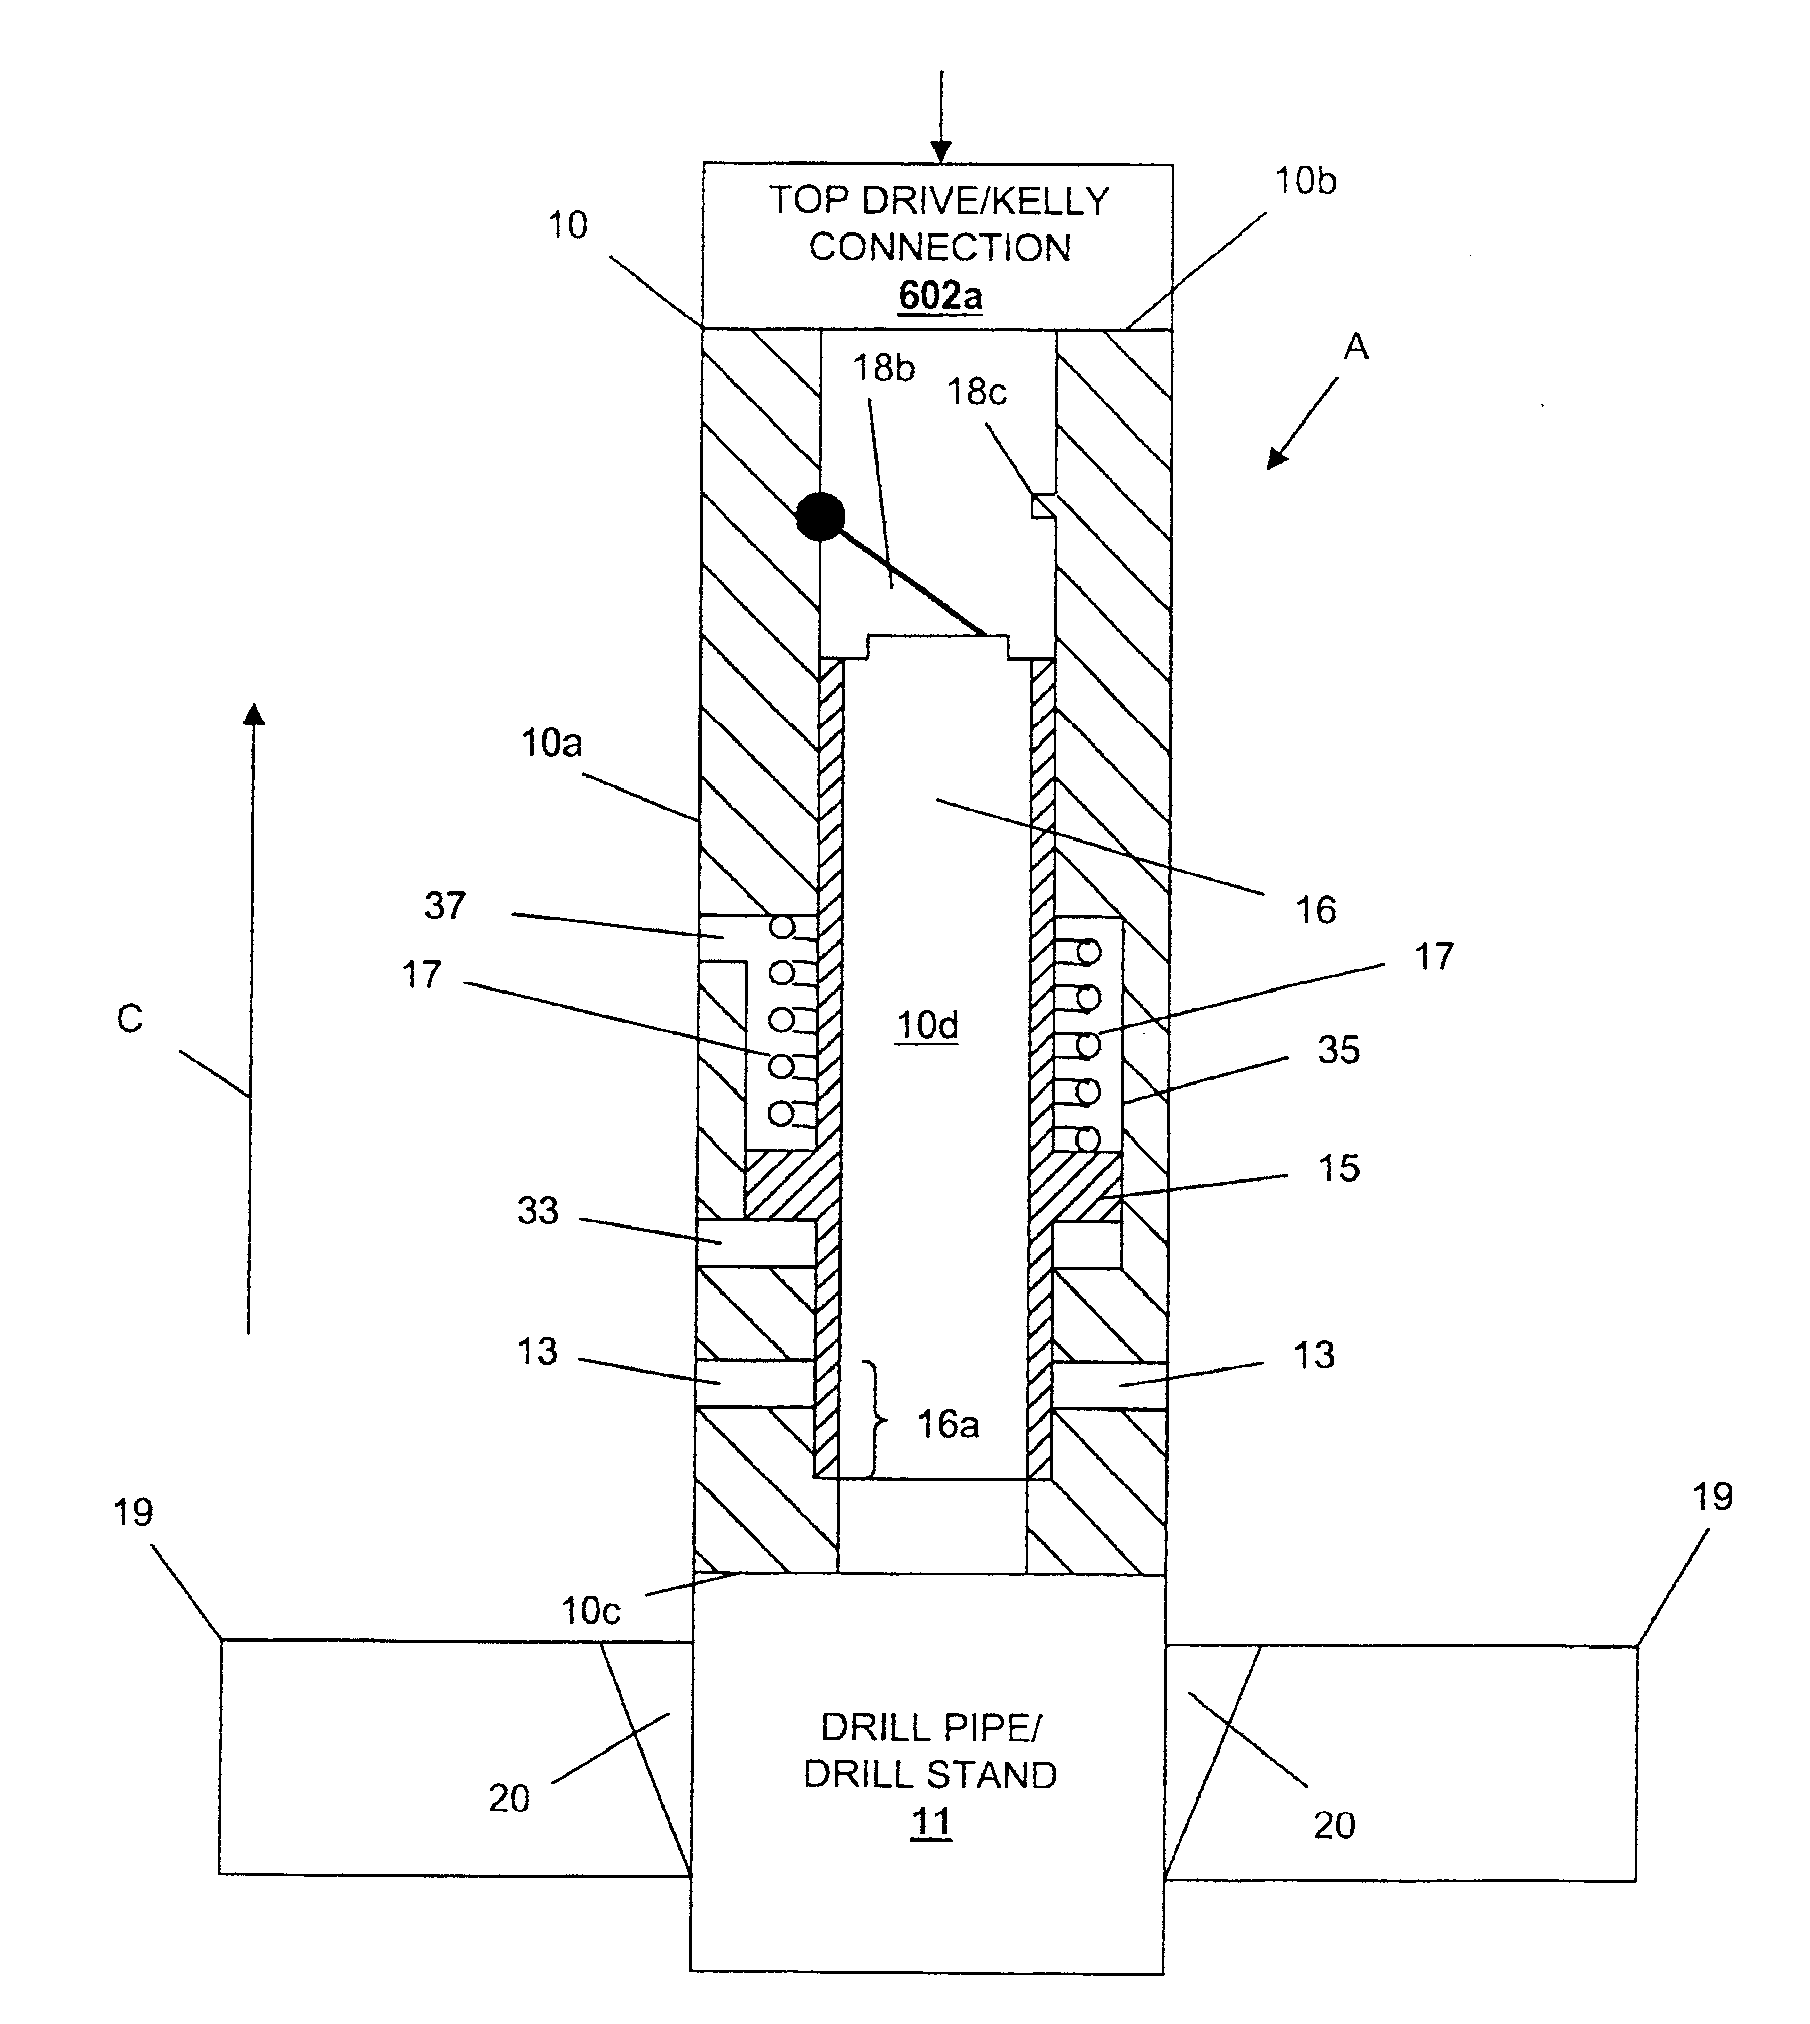 Continuous Circulating Sub for Drill Strings